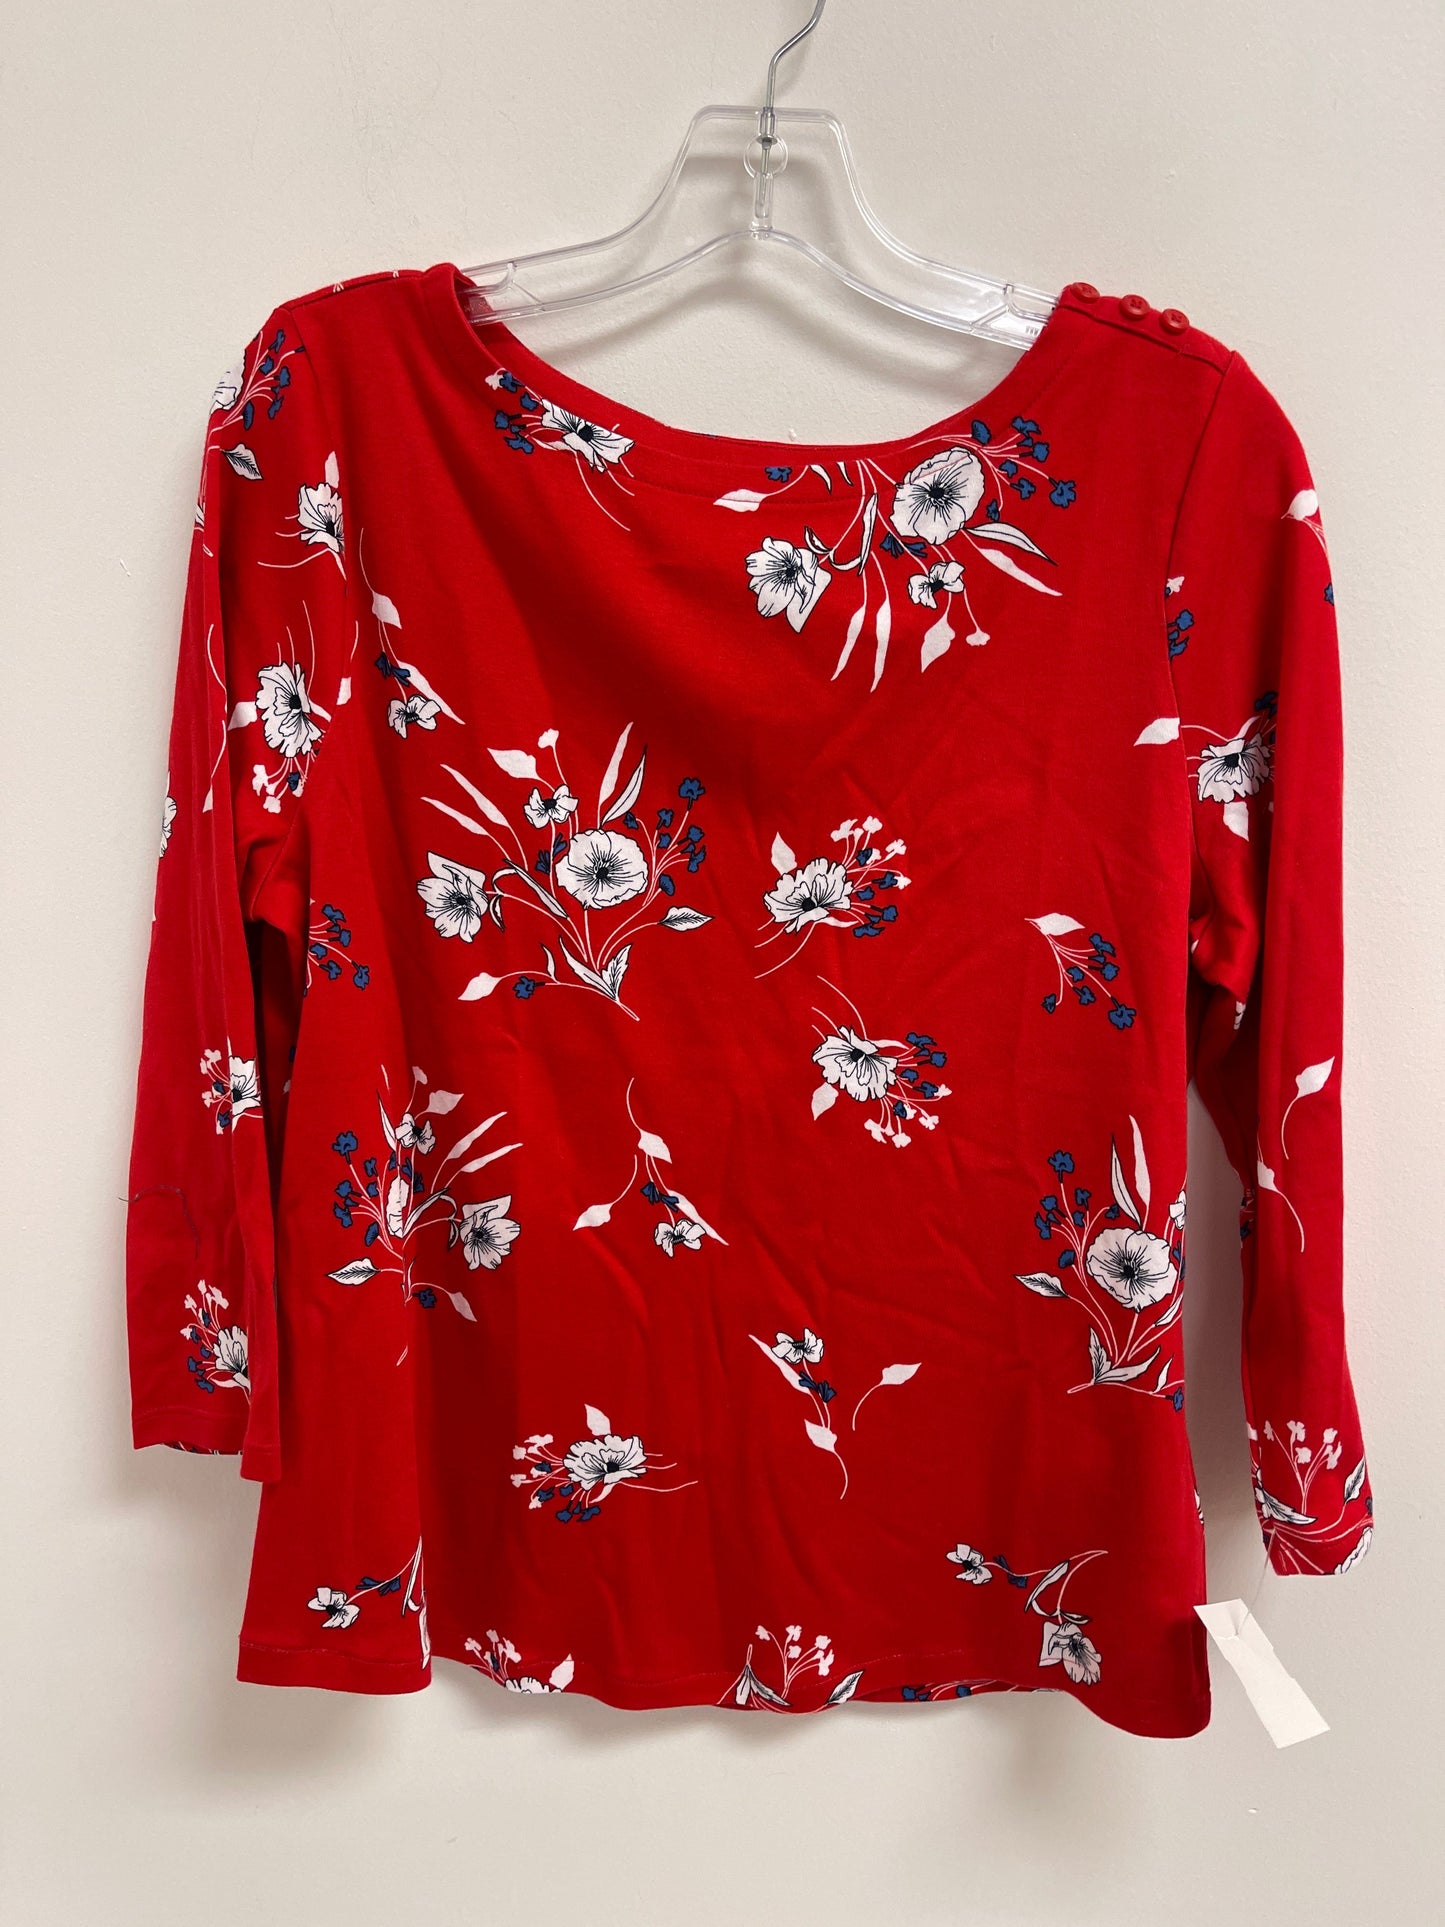 Red Top Long Sleeve Charter Club, Size Xl